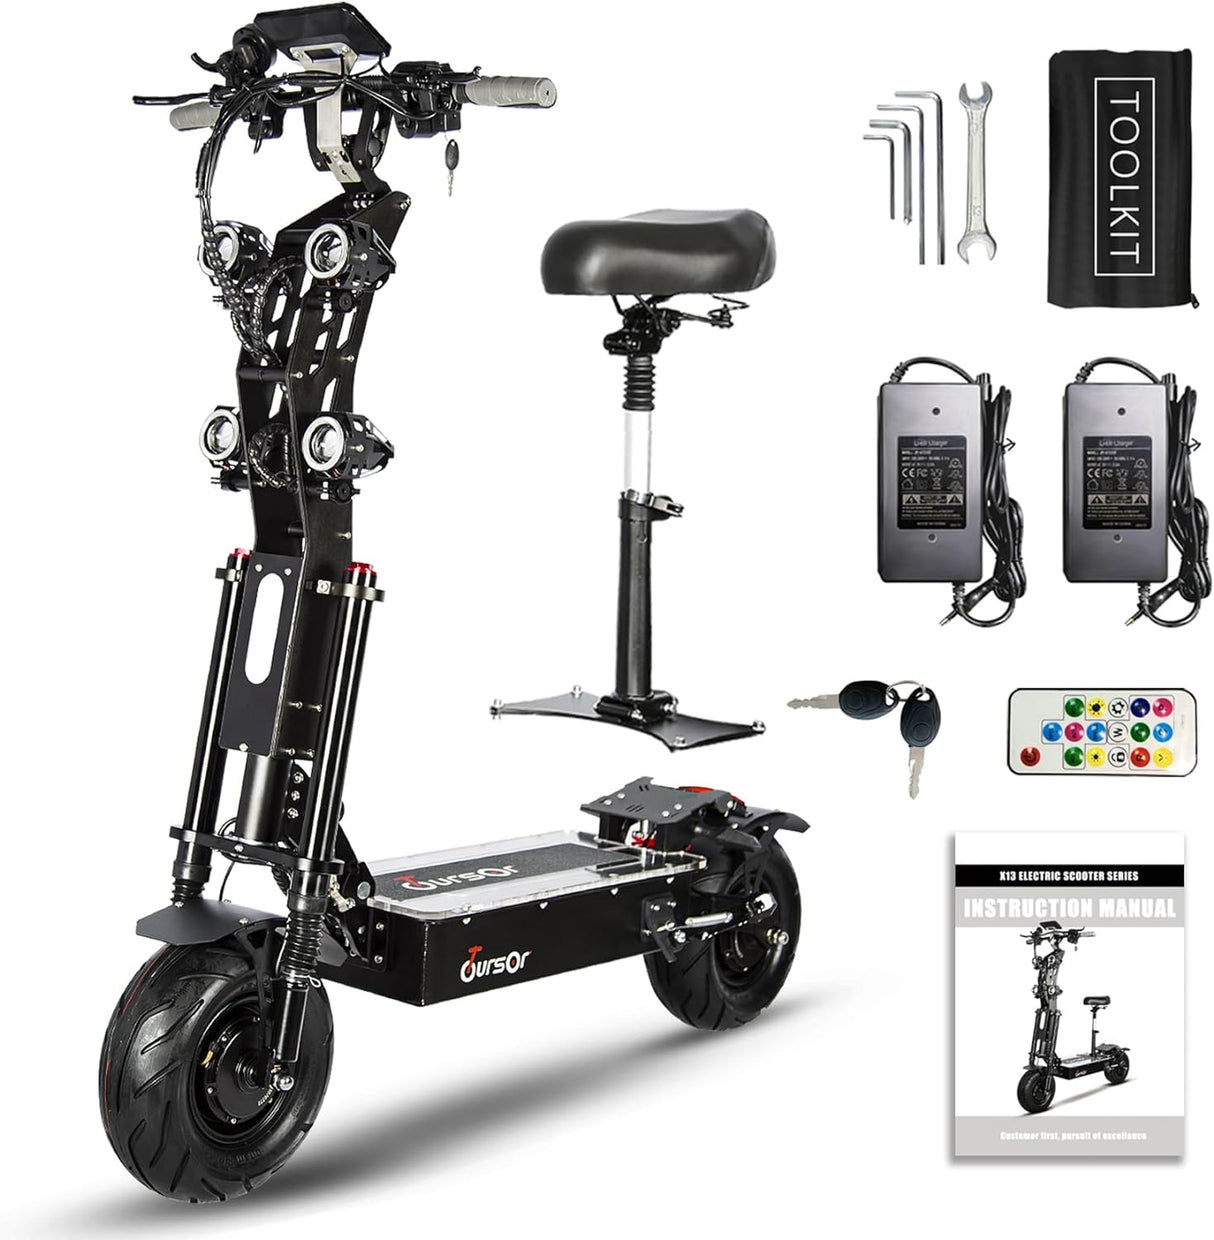 TOURSOR X13 60V 13" Folding Electric Scooter with Seat 4000W*2 Dual Motors 60V 40Ah Battery